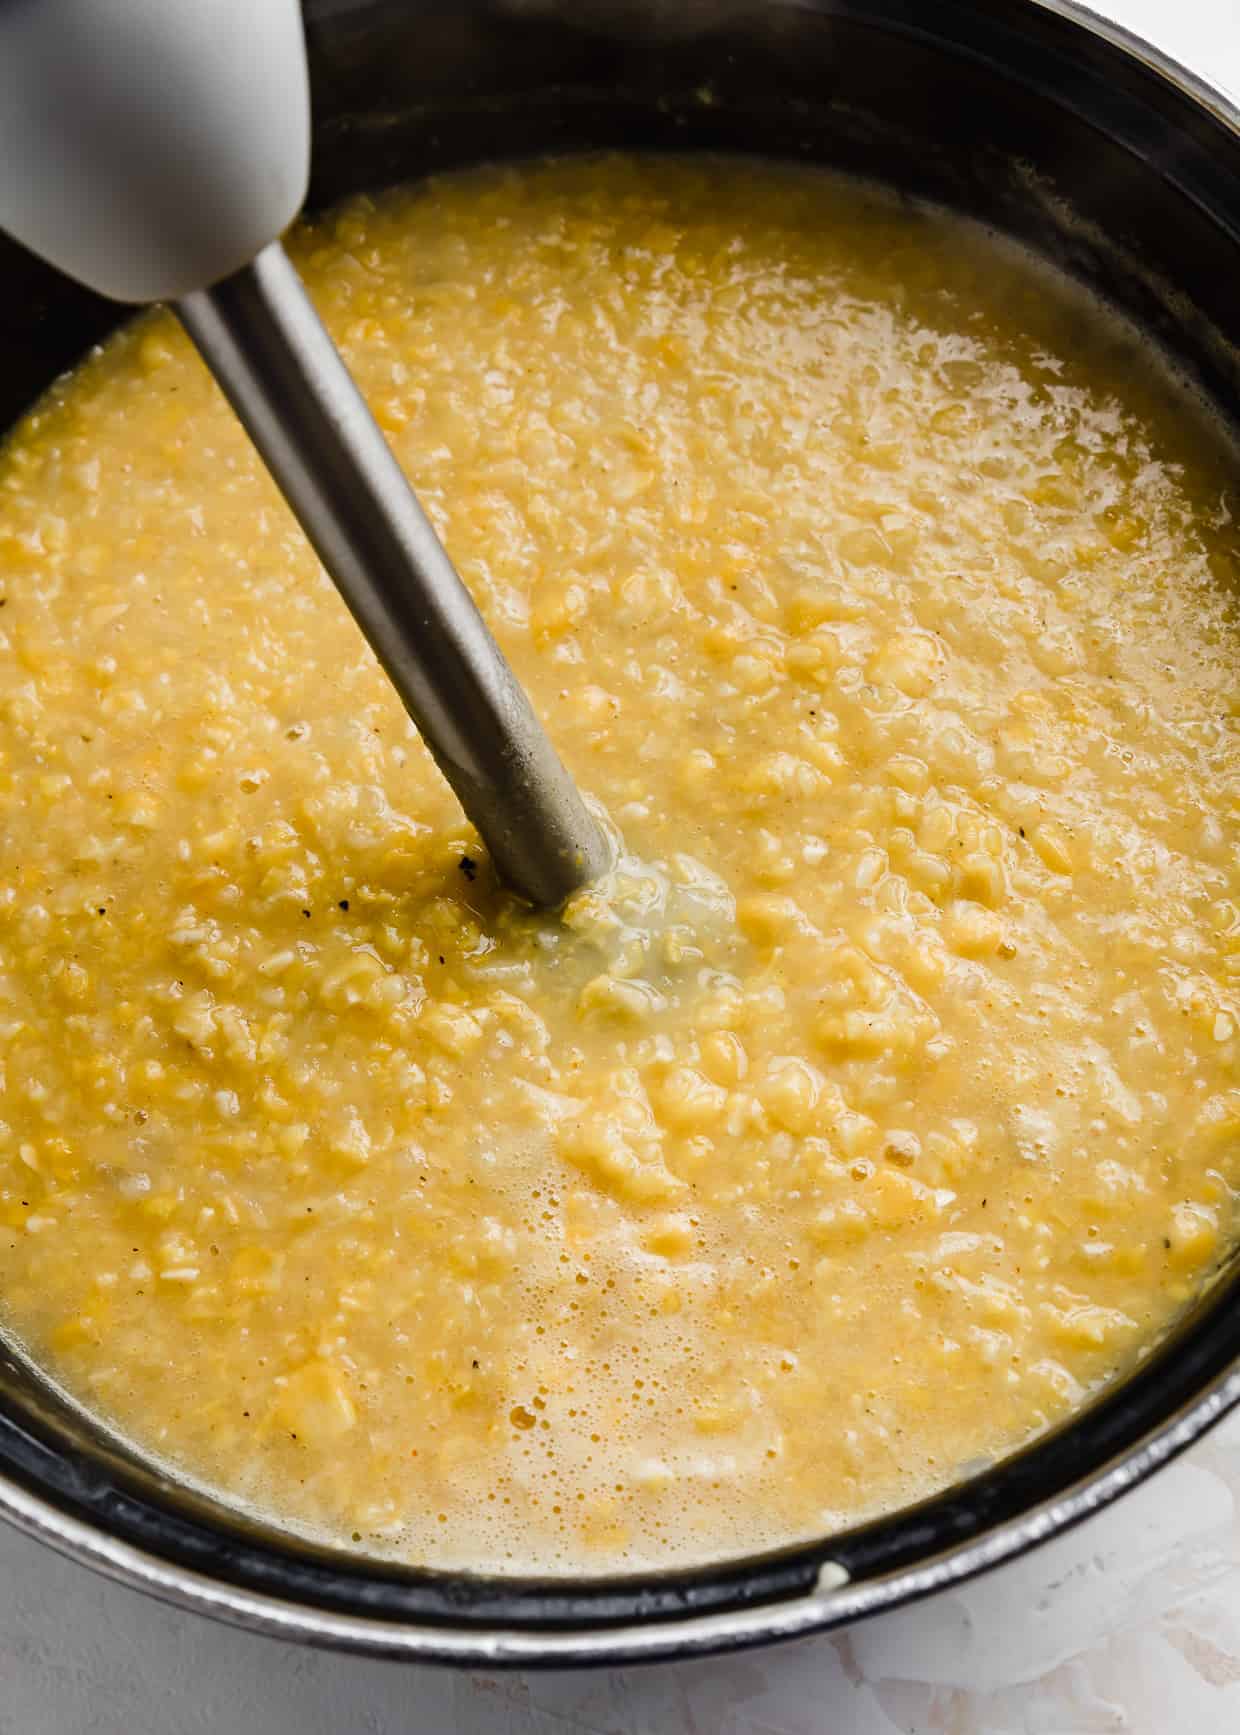 An immersion blender in a large pot full of cooked corn and potatoes for making Ham and Corn Chowder.